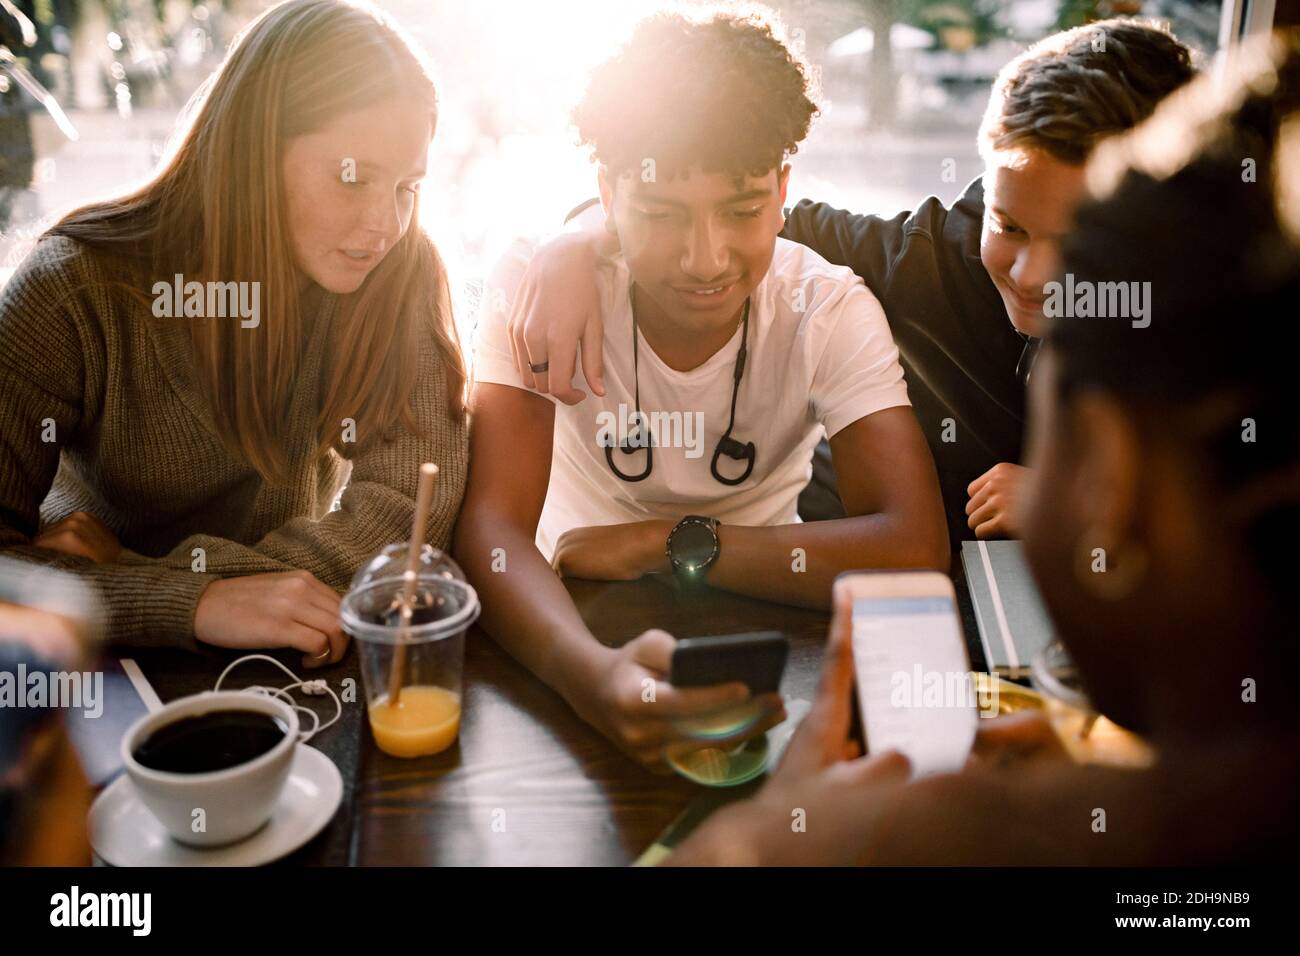 Teenage girls and boys surfing internet on mobile phones while sitting in cafe Stock Photo